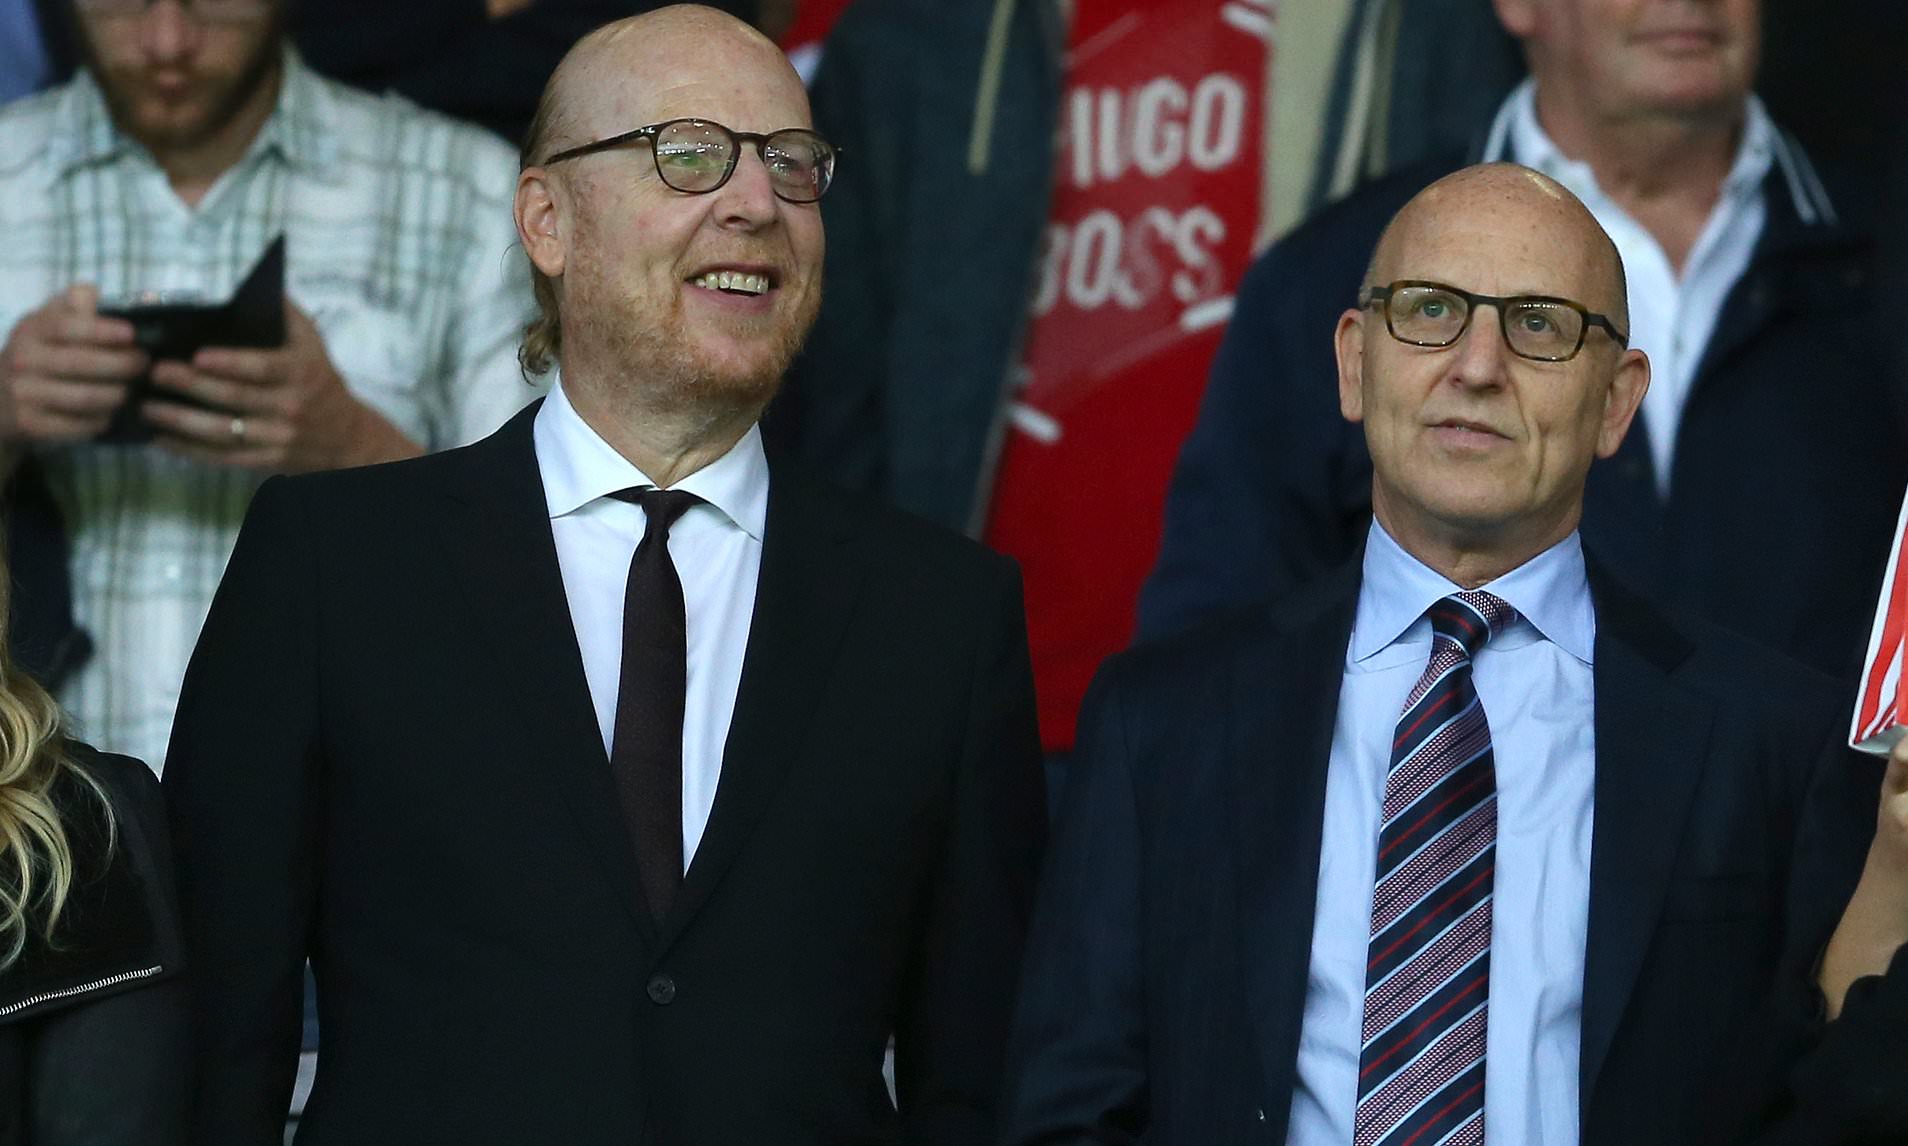 Manchester United TAKEOVER: Glazers likely to STAY after former AC Milan owners bid for minority stake; Glazers family, Man Utd Takeover, Manchester United SALE